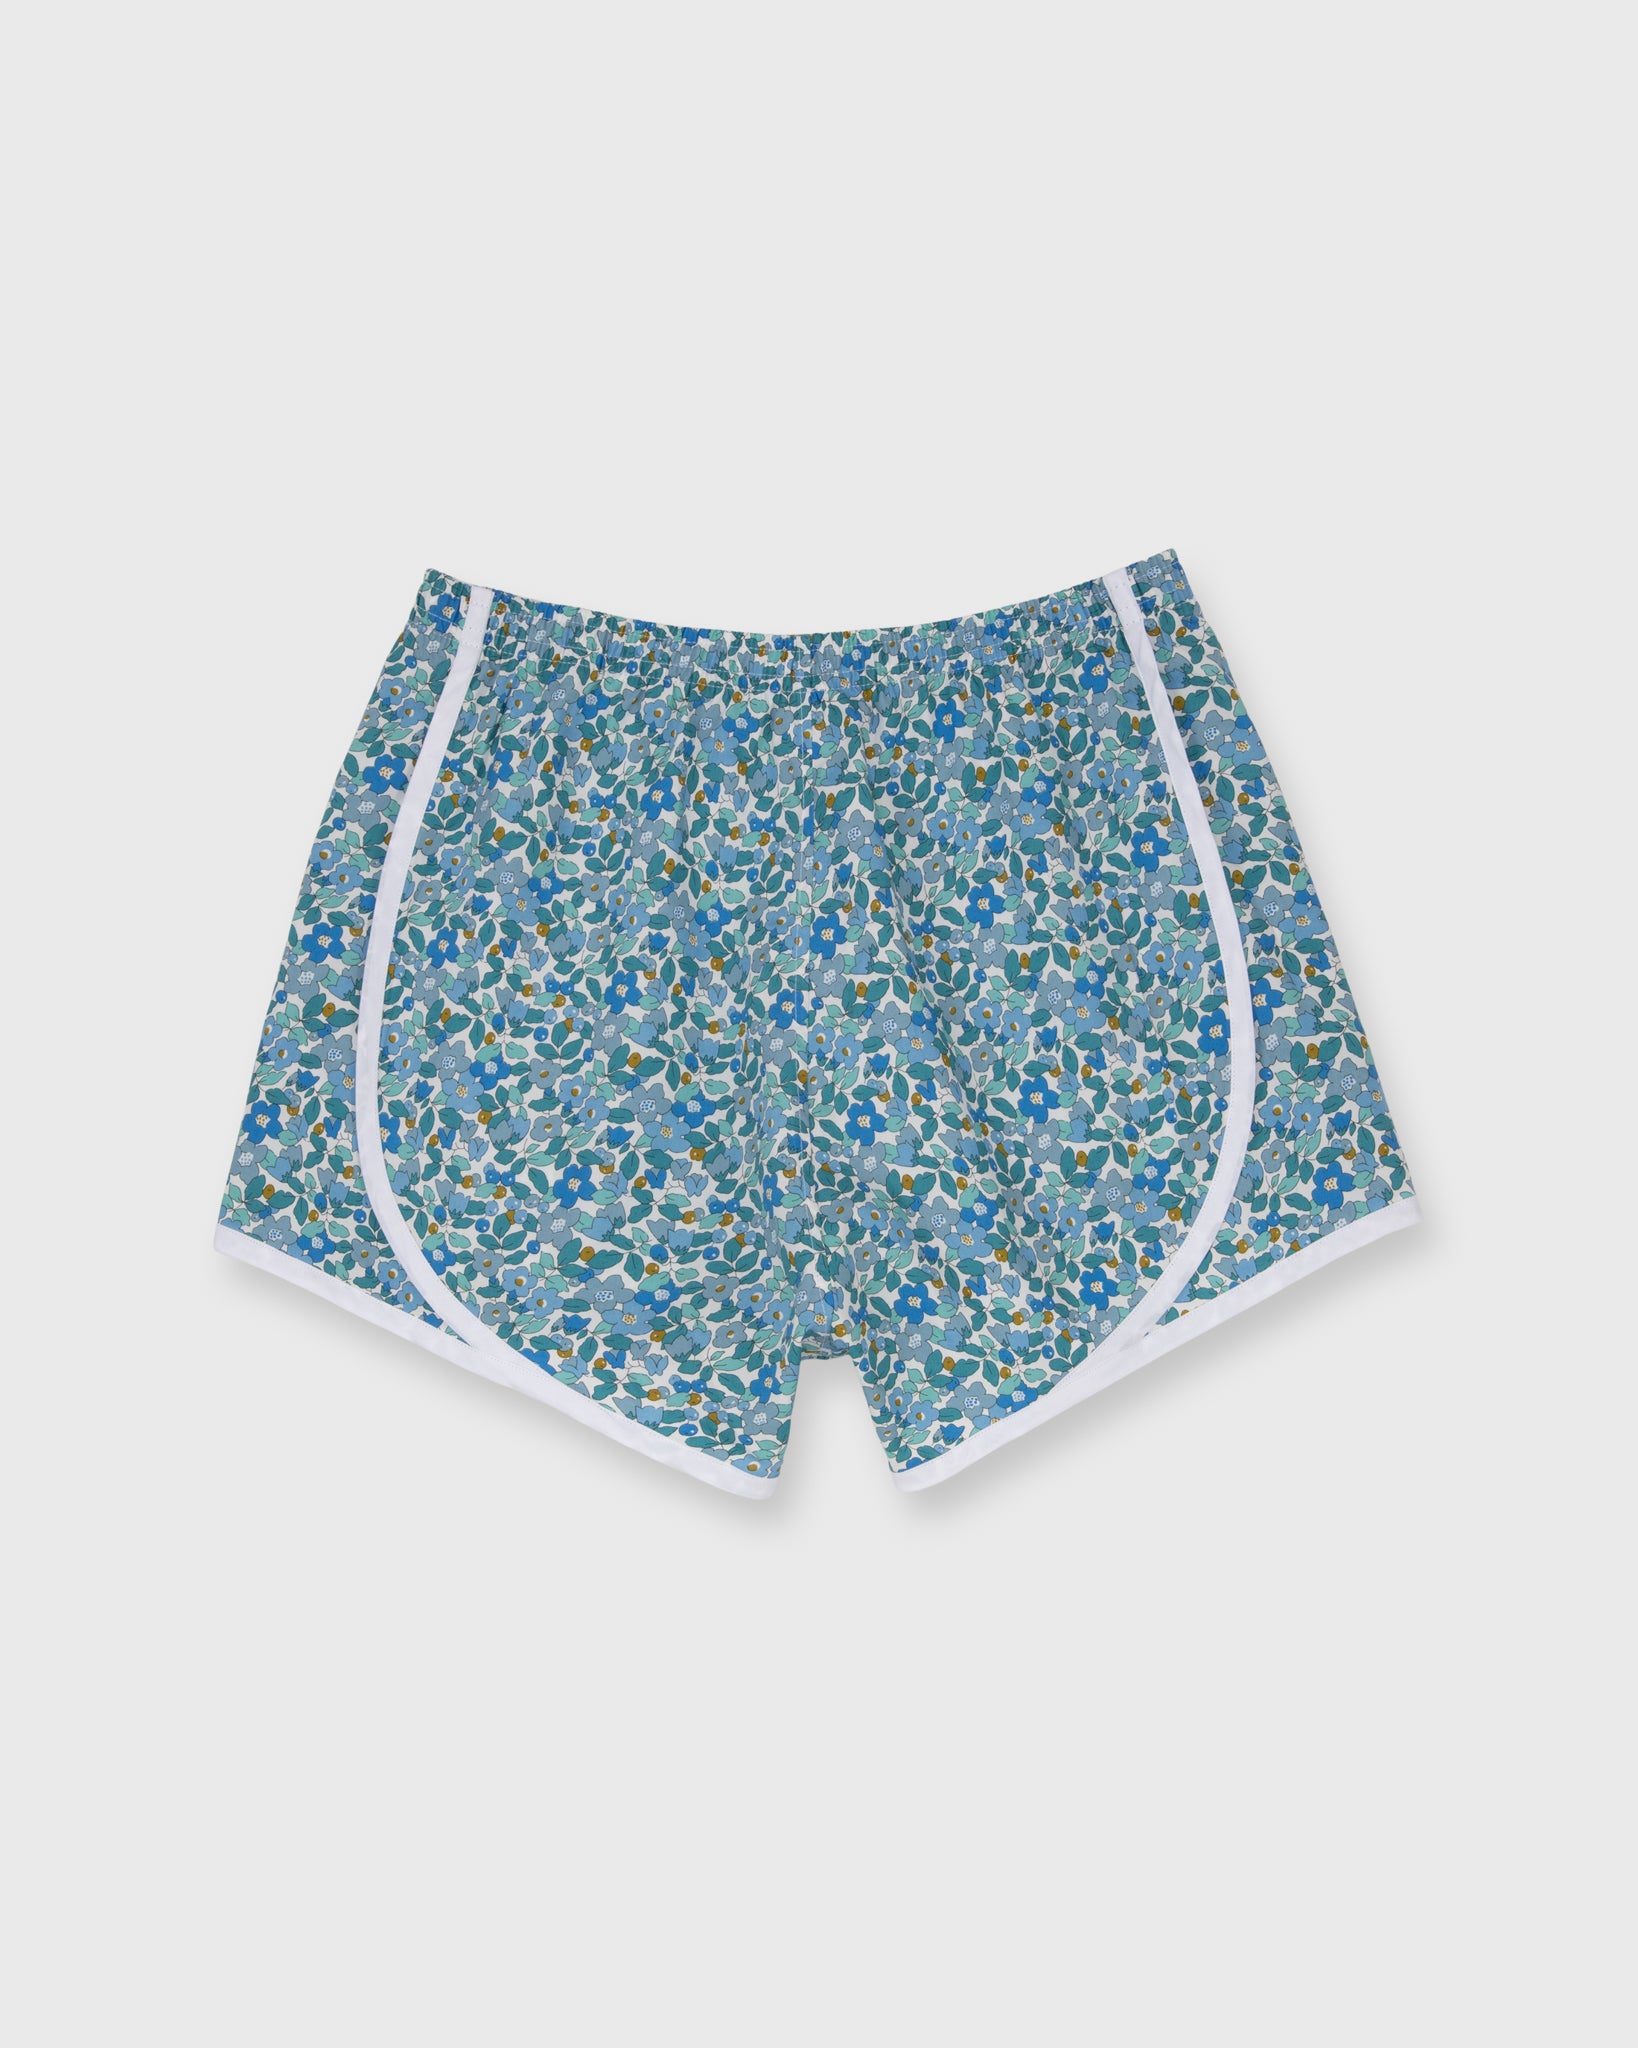 Track Short in Blue/Mint Betsy Berry Liberty Fabric